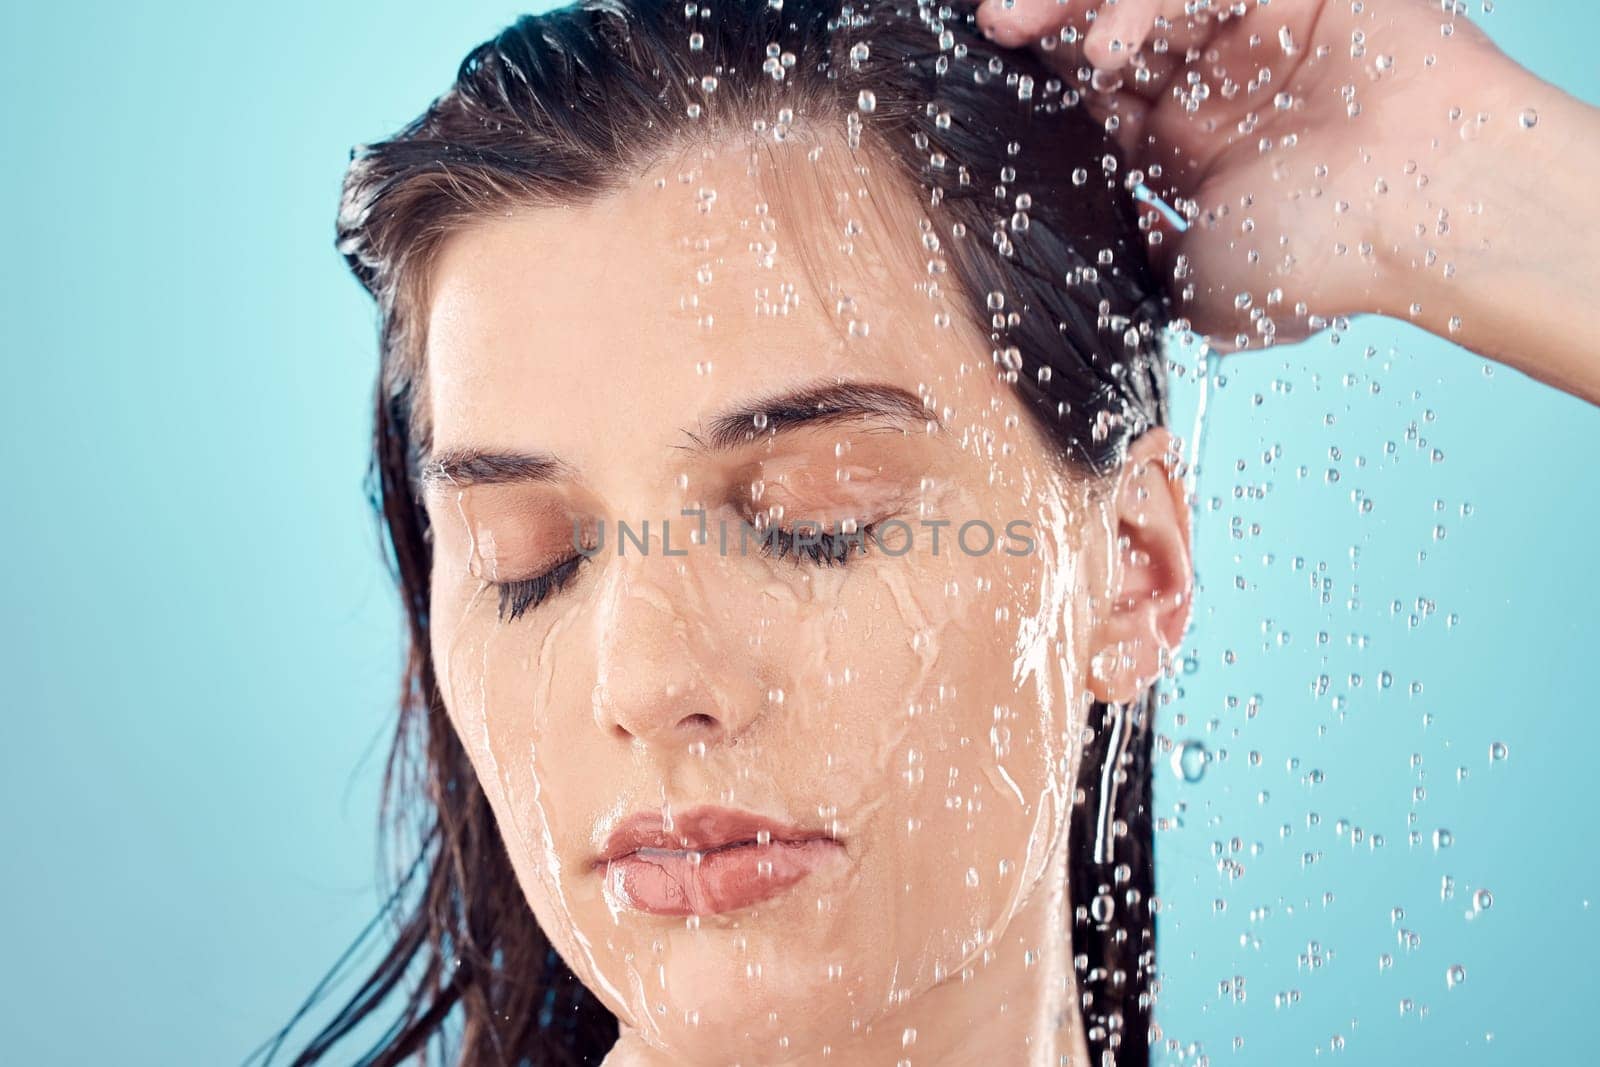 Water splash, hair care and face of woman in shower in studio isolated on a blue background. Beauty, eyes closed and young female model washing, cleaning or bathing for hygiene, skincare and health